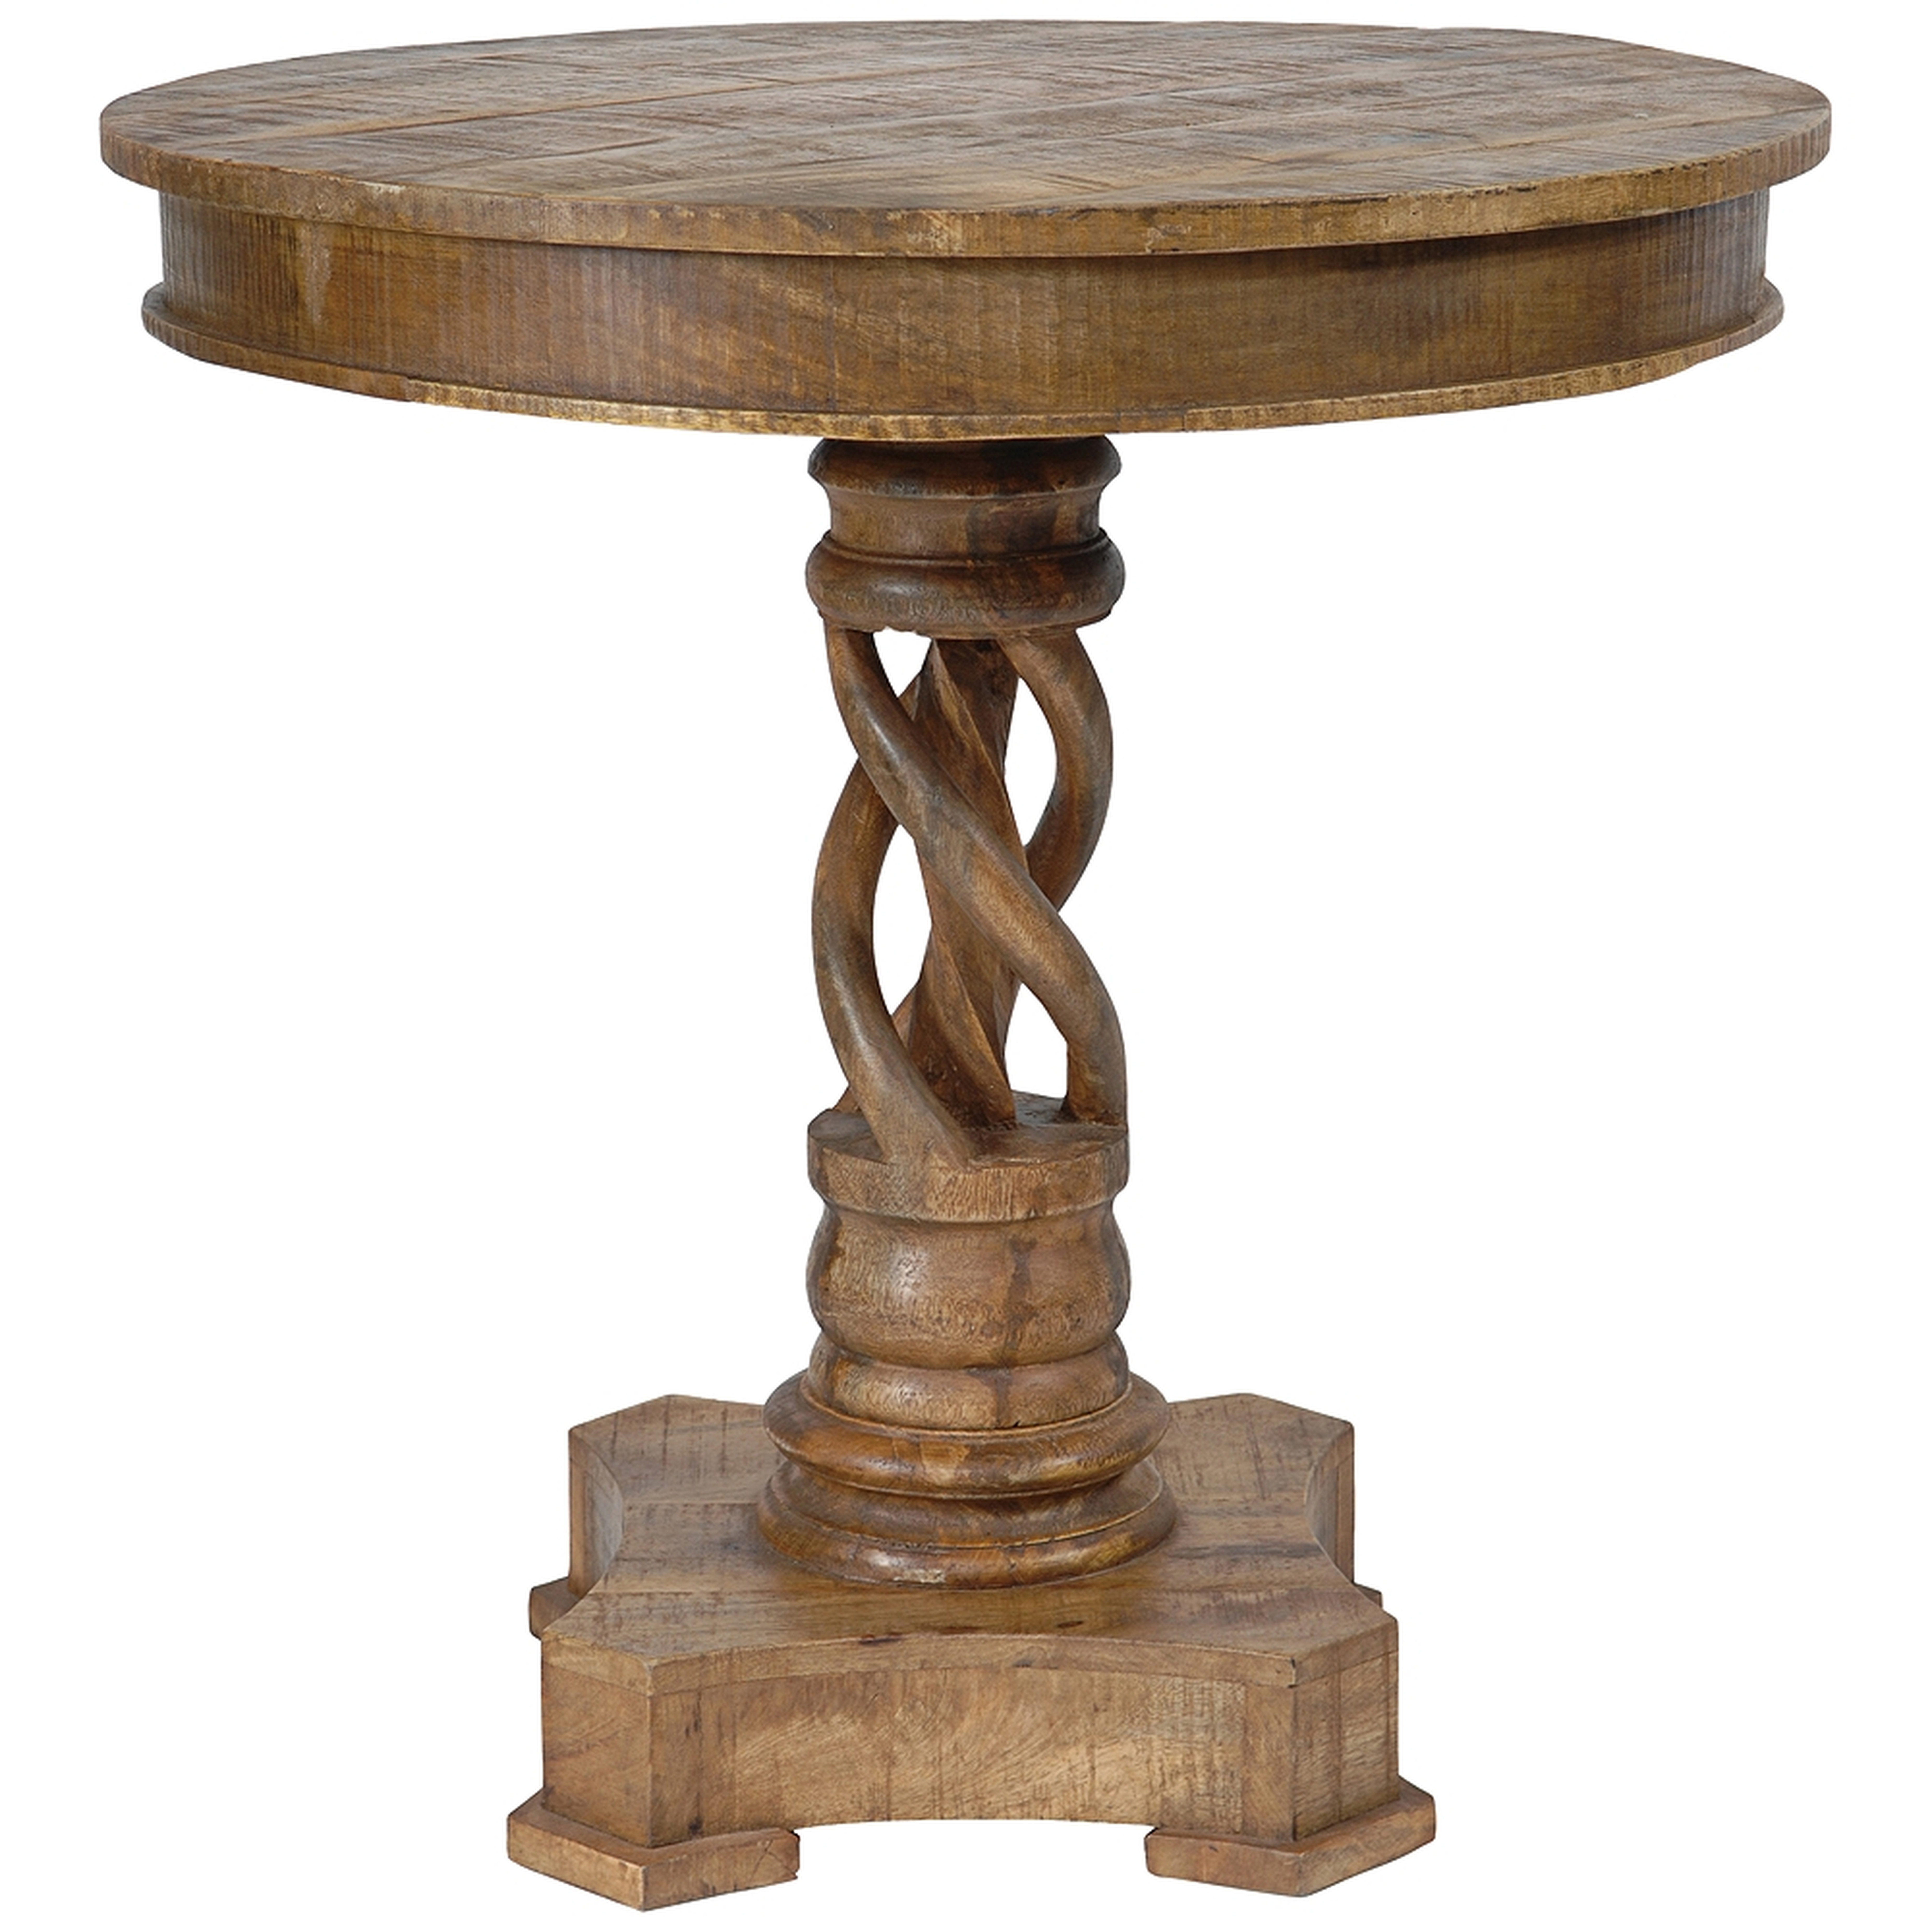 Bengal Manor Natural Mango Wood Twist Accent Table - Style # 56G84 - Lamps Plus